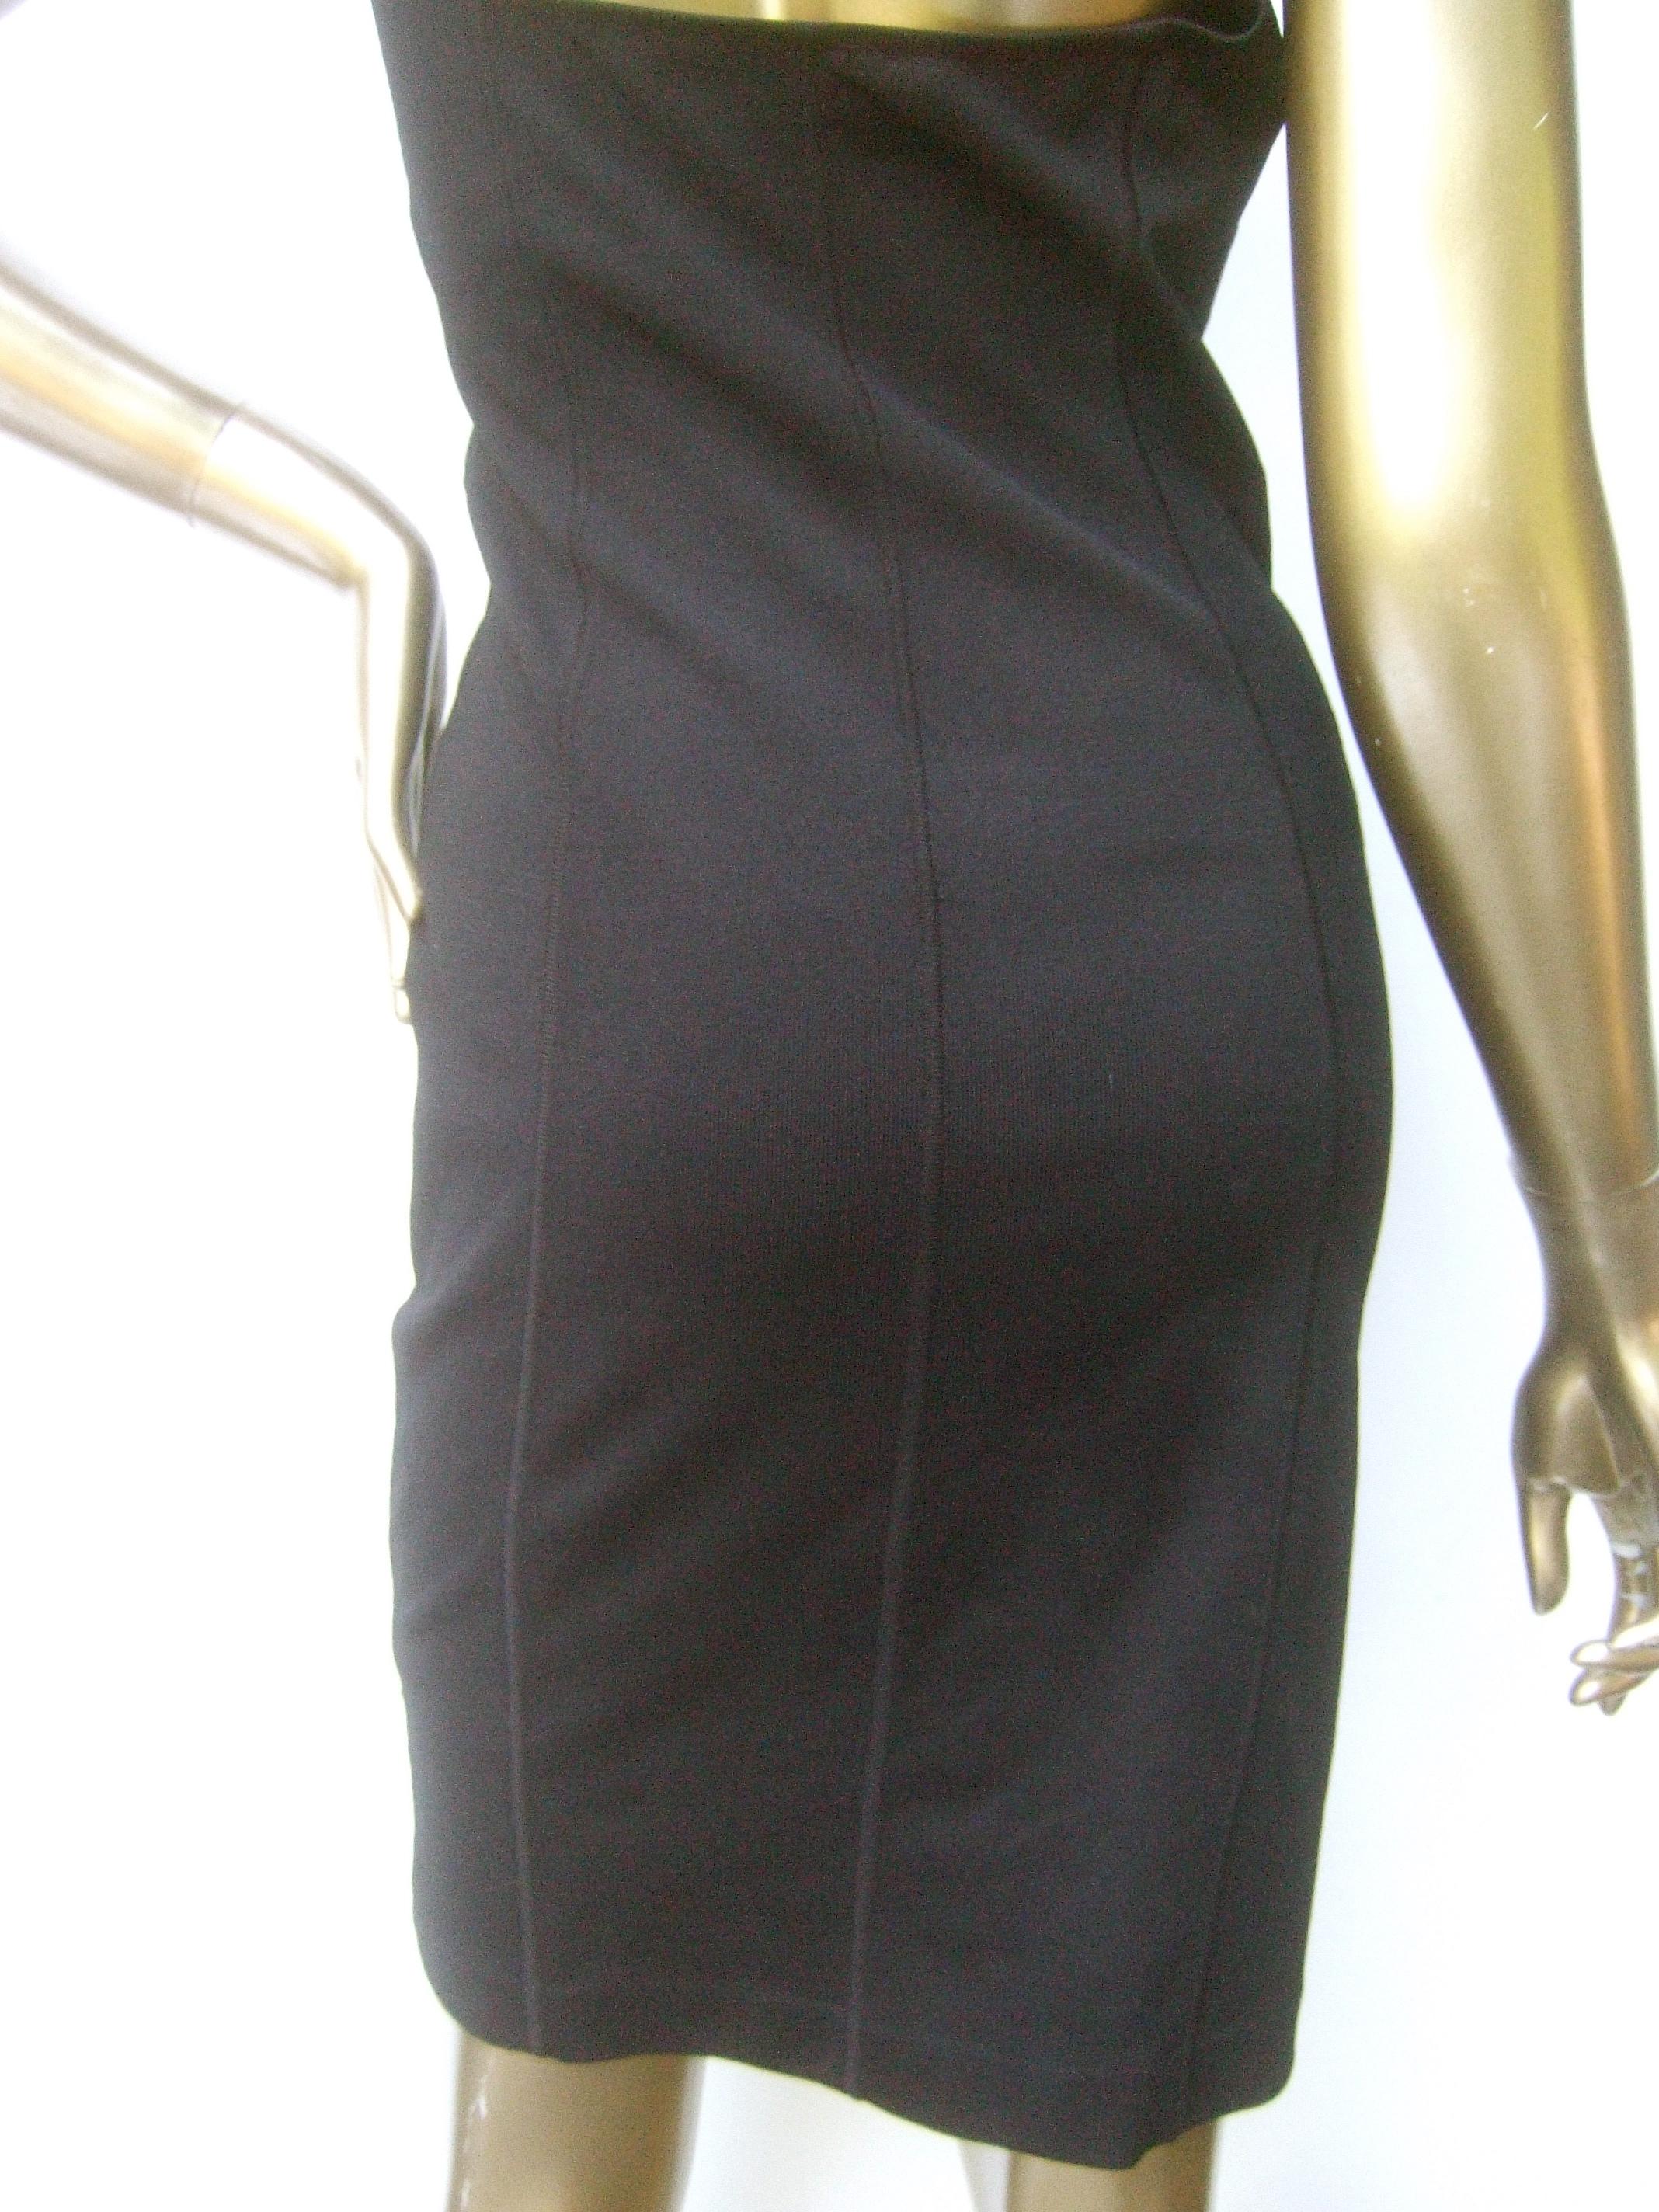 Gucci Italy Chic Black Stretch Knit Tank Dress Tom Ford Era c 1990s For Sale 3